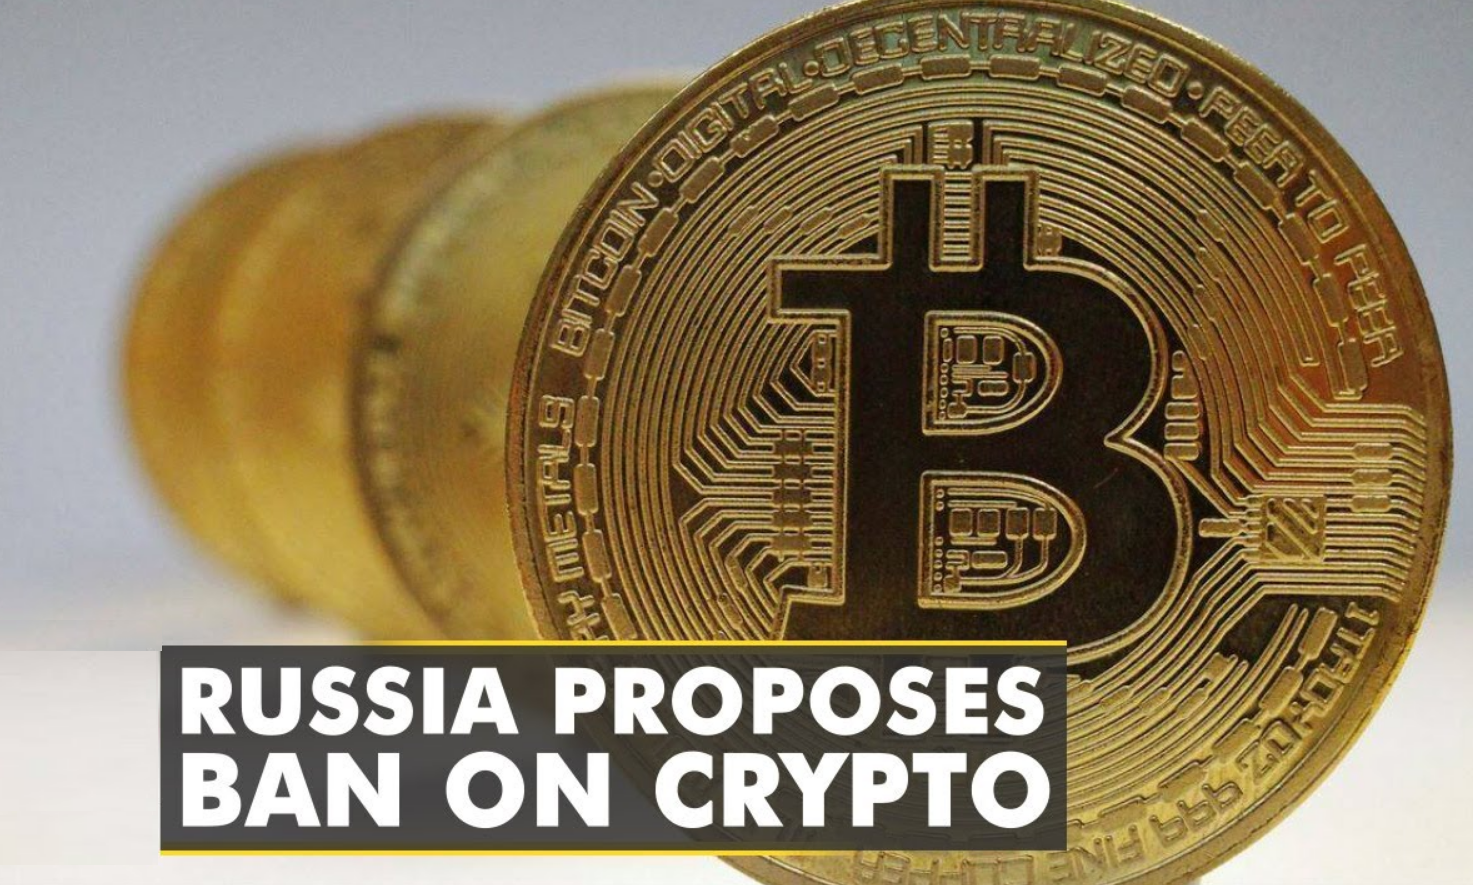 The Association of Banks of Russia Want to Ban Self-Custody Crypto Wallets